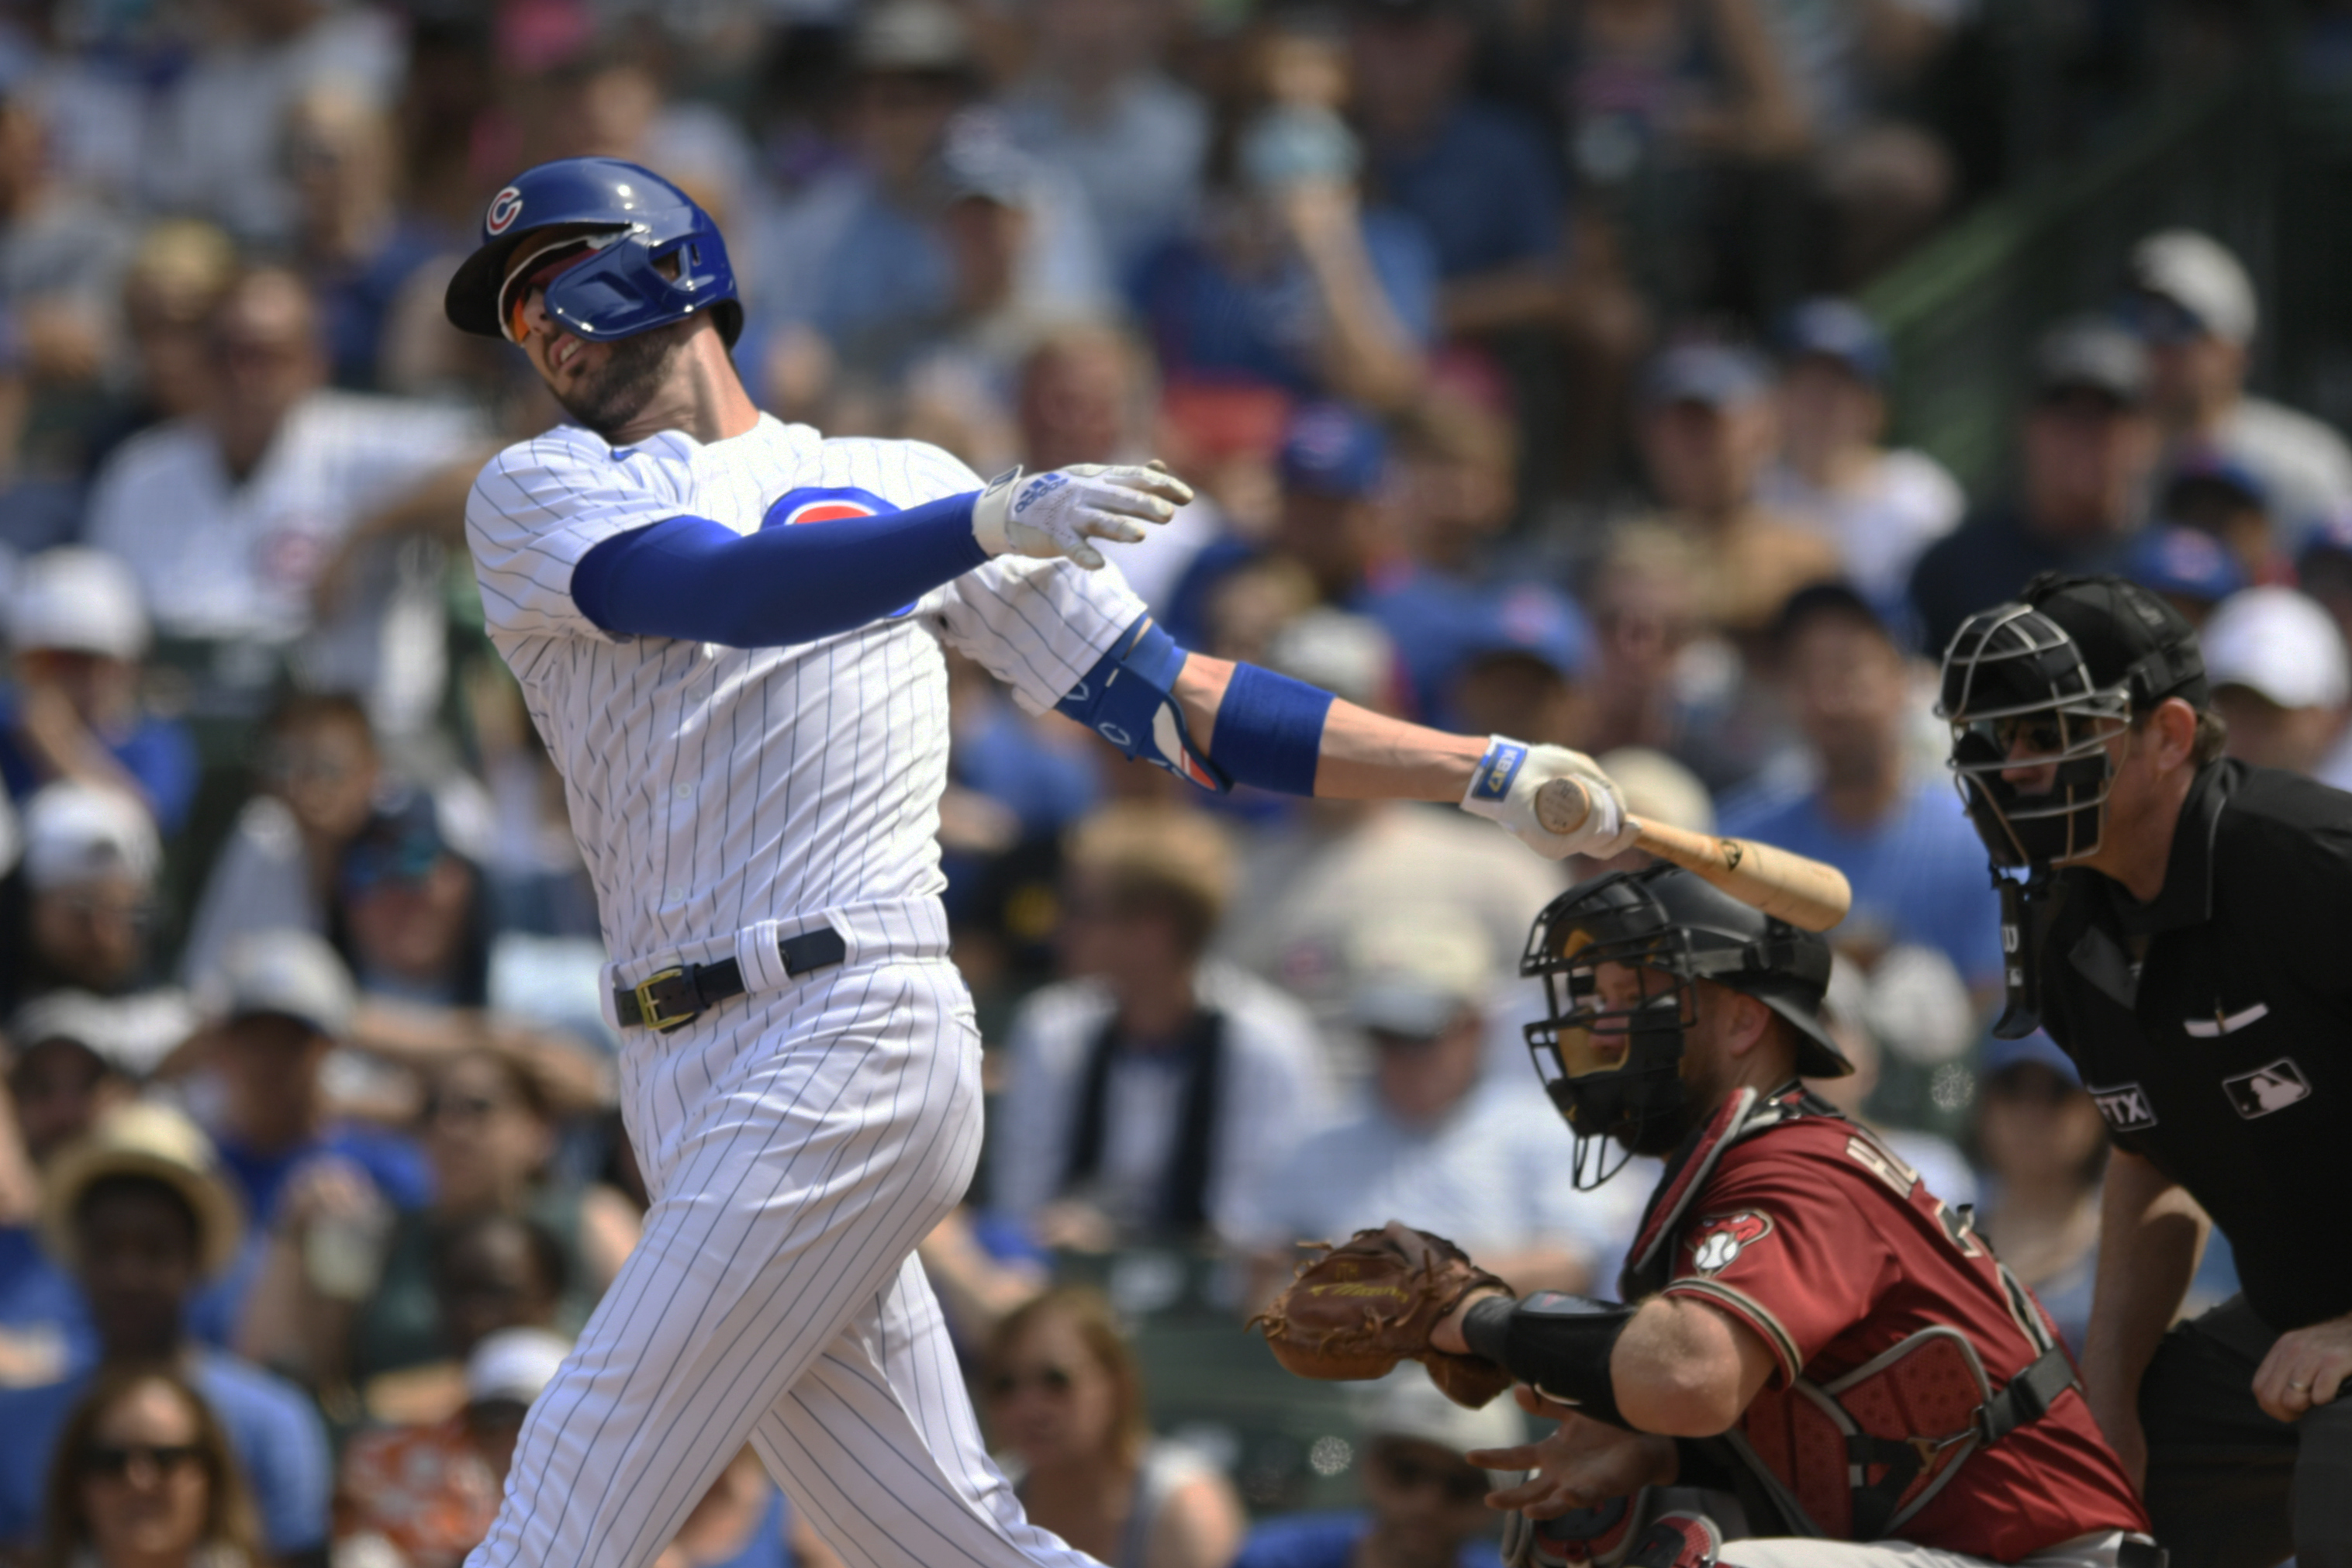 Newly acquired 3B/OF Kris Bryant 'the perfect fit' for Giants